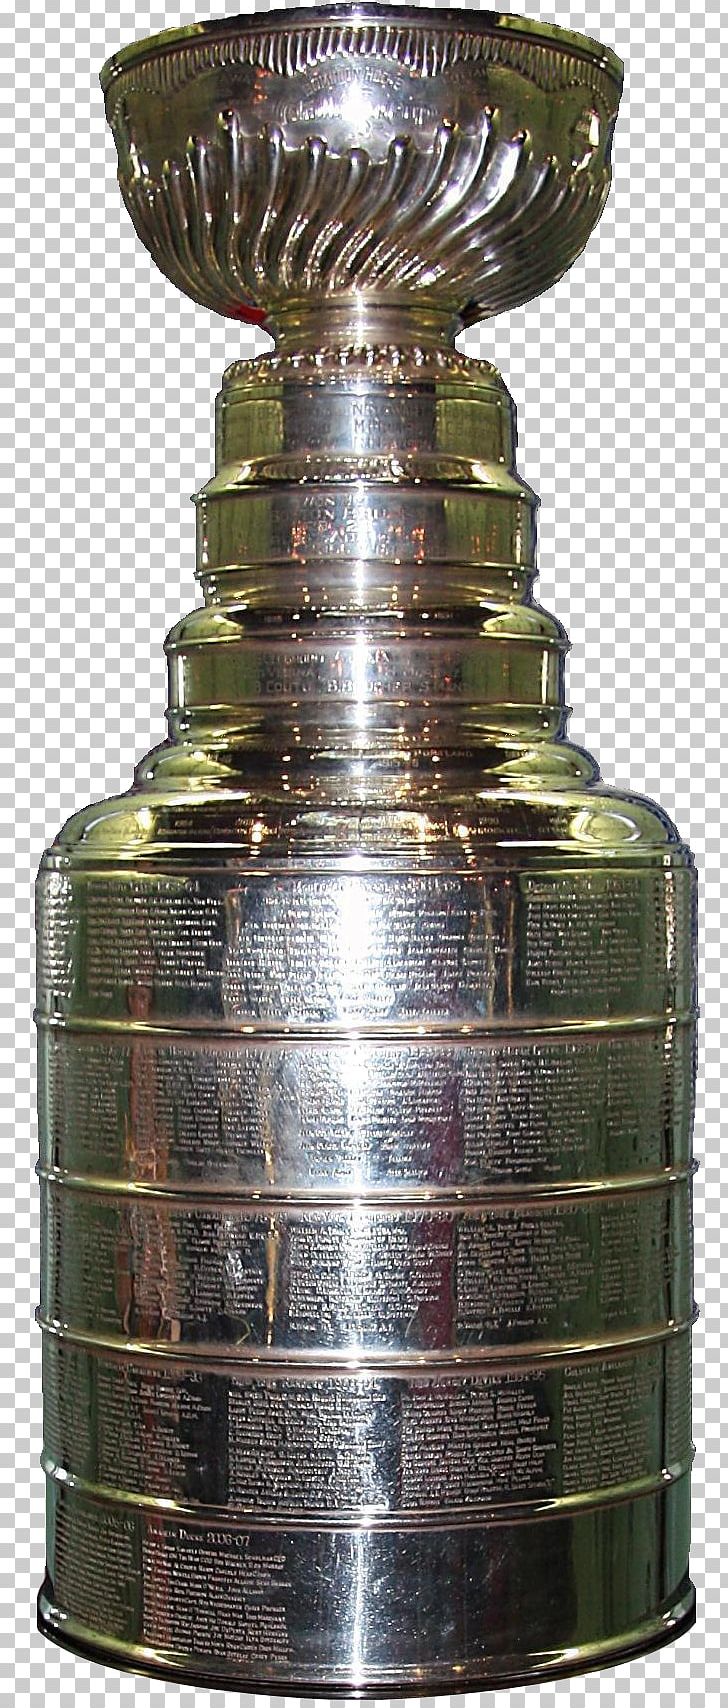 2017 Stanley Cup Playoffs 2015 Stanley Cup Finals 2017 Stanley Cup Finals National Hockey League 2013 Stanley Cup Finals PNG, Clipart, 2013 Stanley Cup Finals, 2017 Stanley Cup Finals, 2017 Stanley Cup Playoffs, Brass, Chicago Blackhawks Free PNG Download